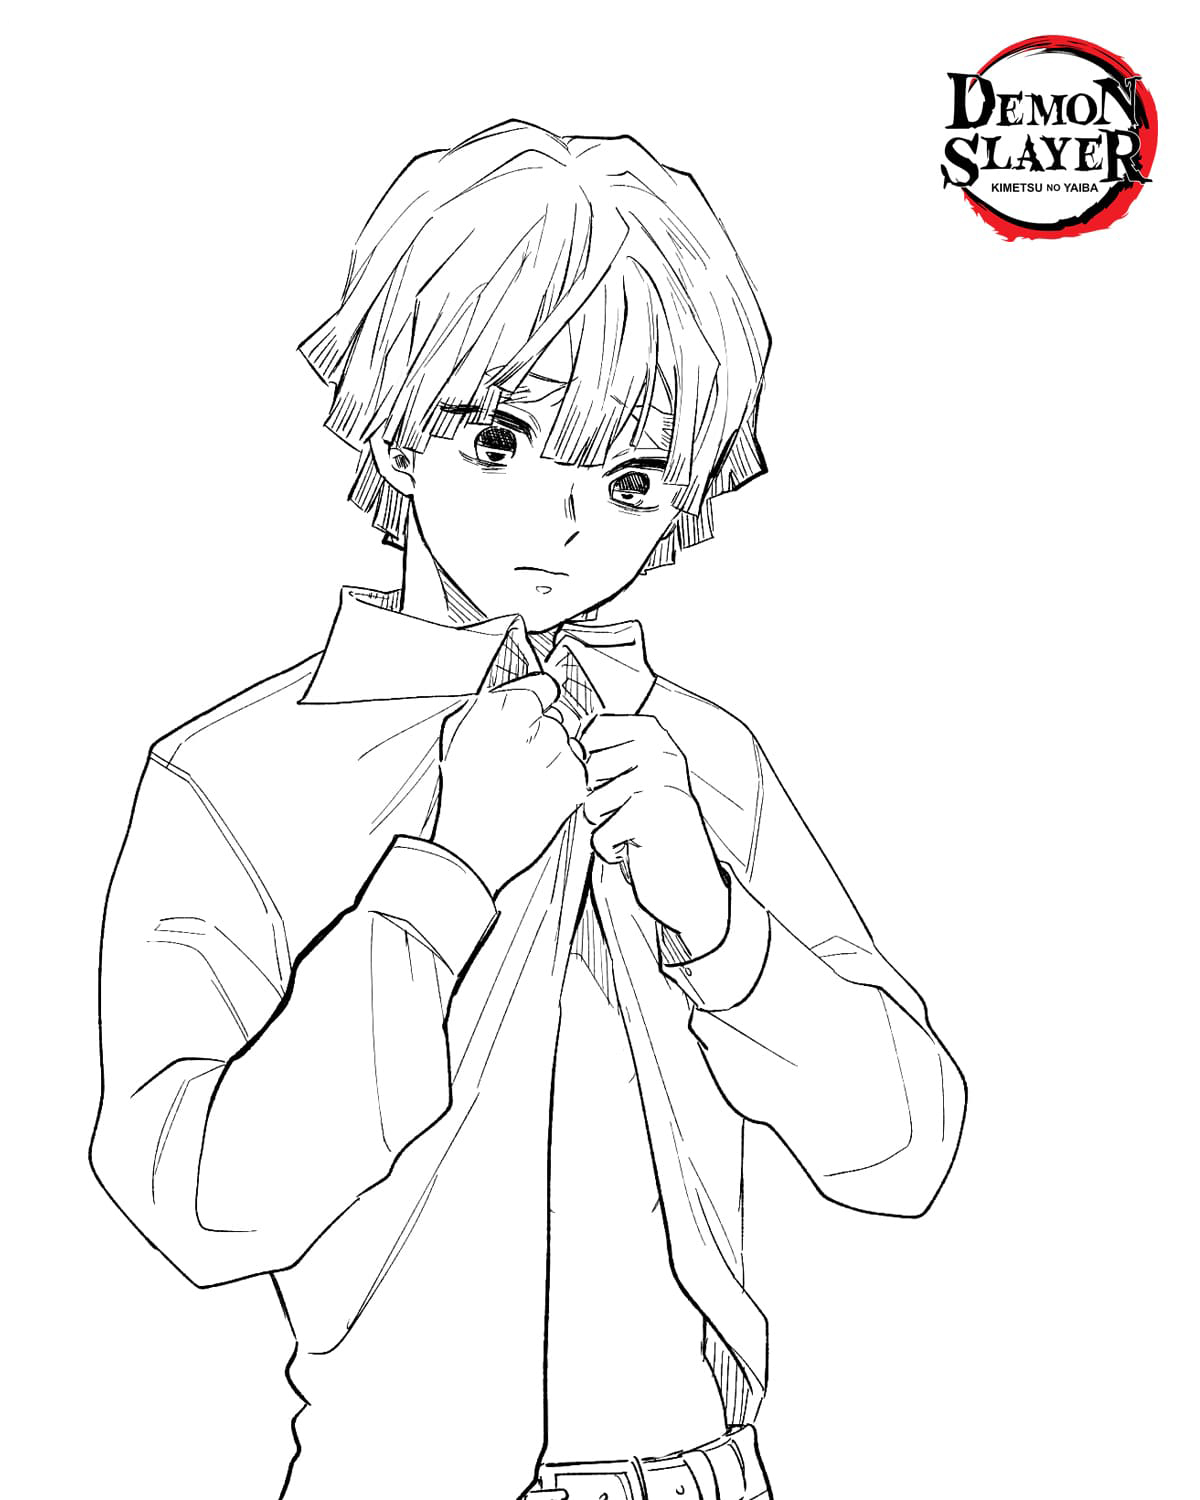 Zenitsu Highschool boy Coloring Pages